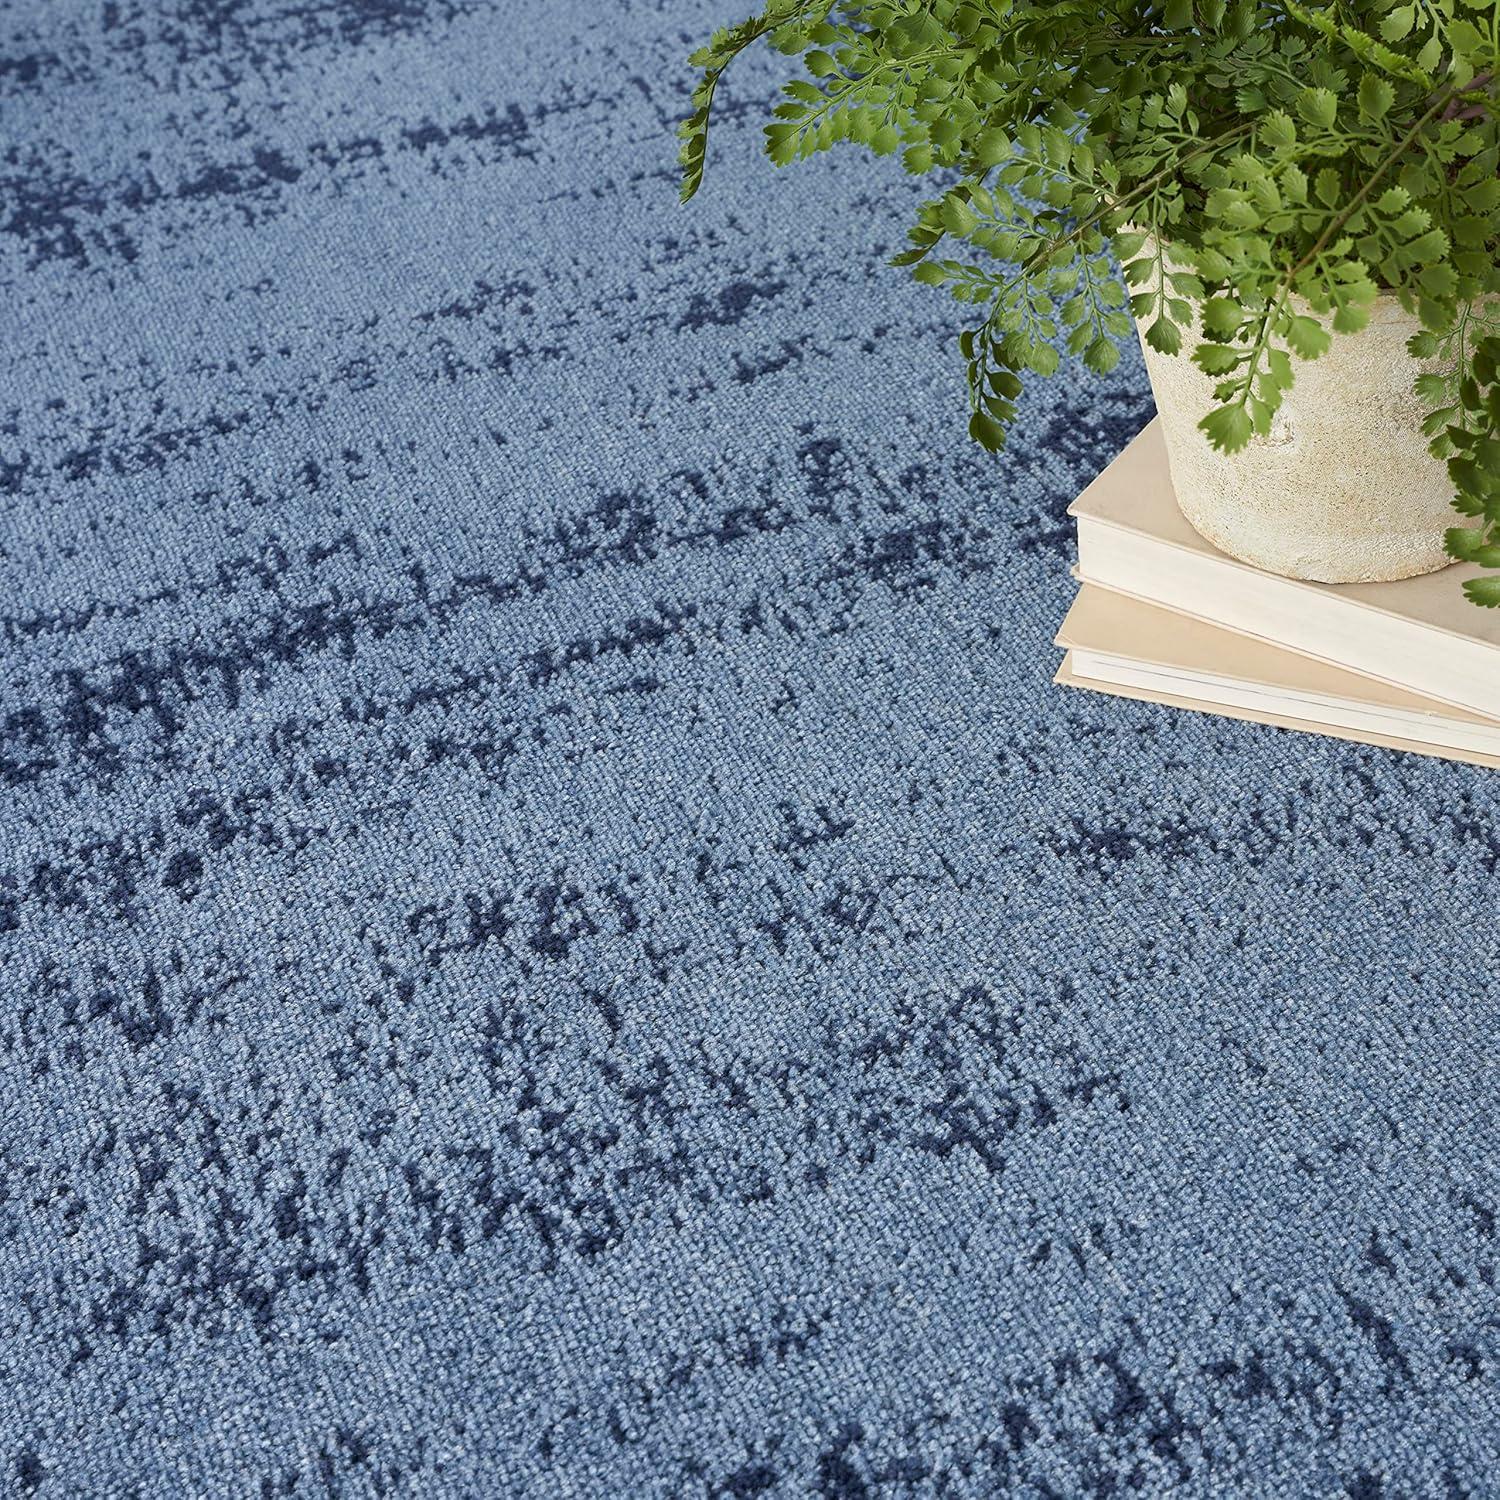 Denim Blue Abstract 5' x 7' Easy-Care Synthetic Outdoor Rug